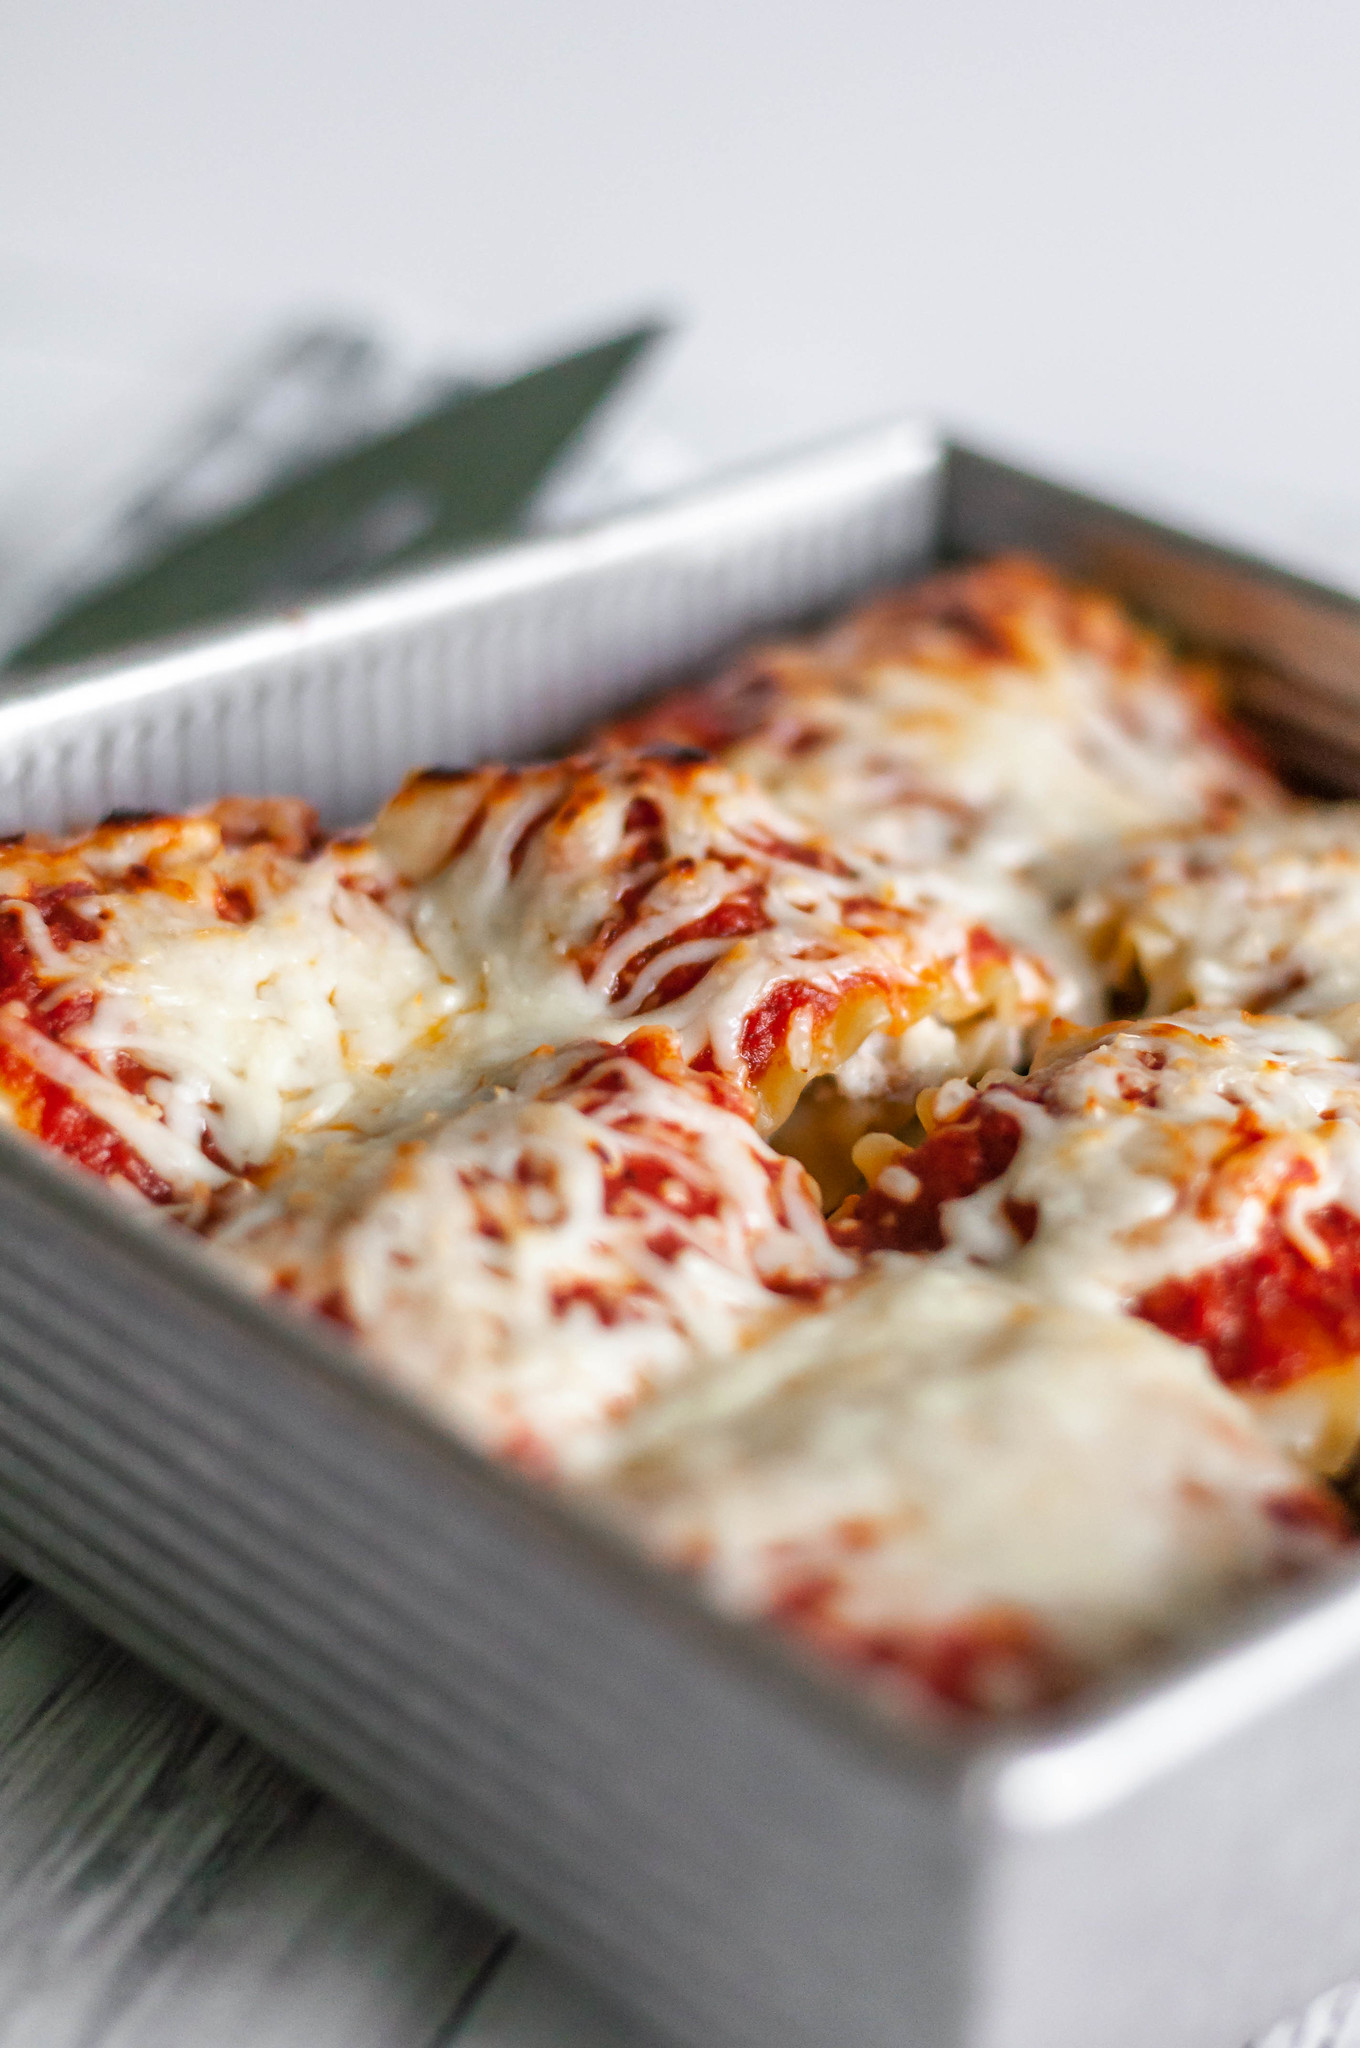 Lasagna Roll Ups are the perfect weeknight dinner when you want that traditional lasagna flavor but only have an hour. And freezer friendly too.